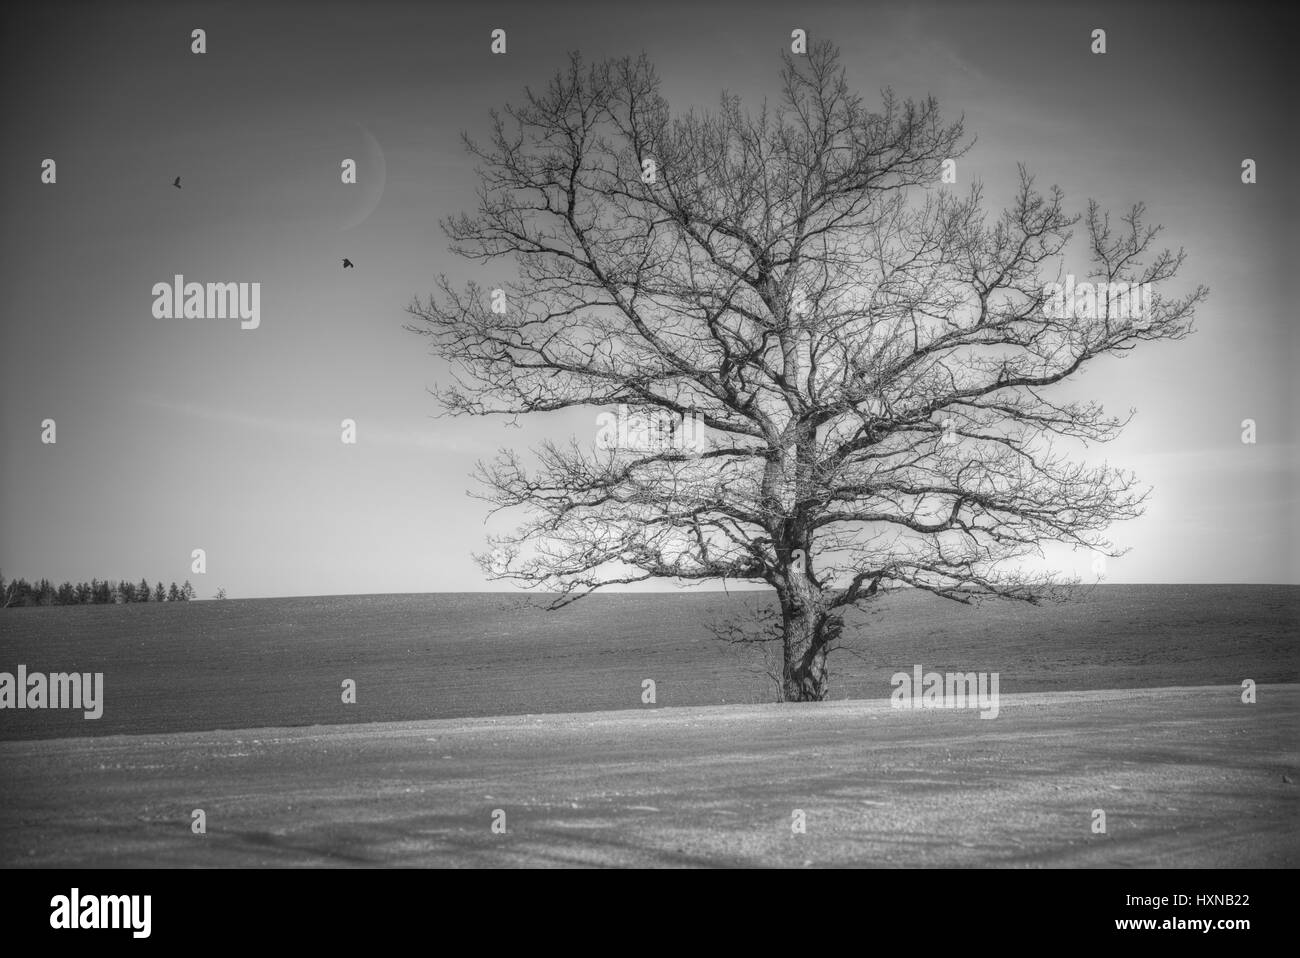 Without leaves a tree in the field stands. Crows are flying. Black and white photography. minimalism Stock Photo